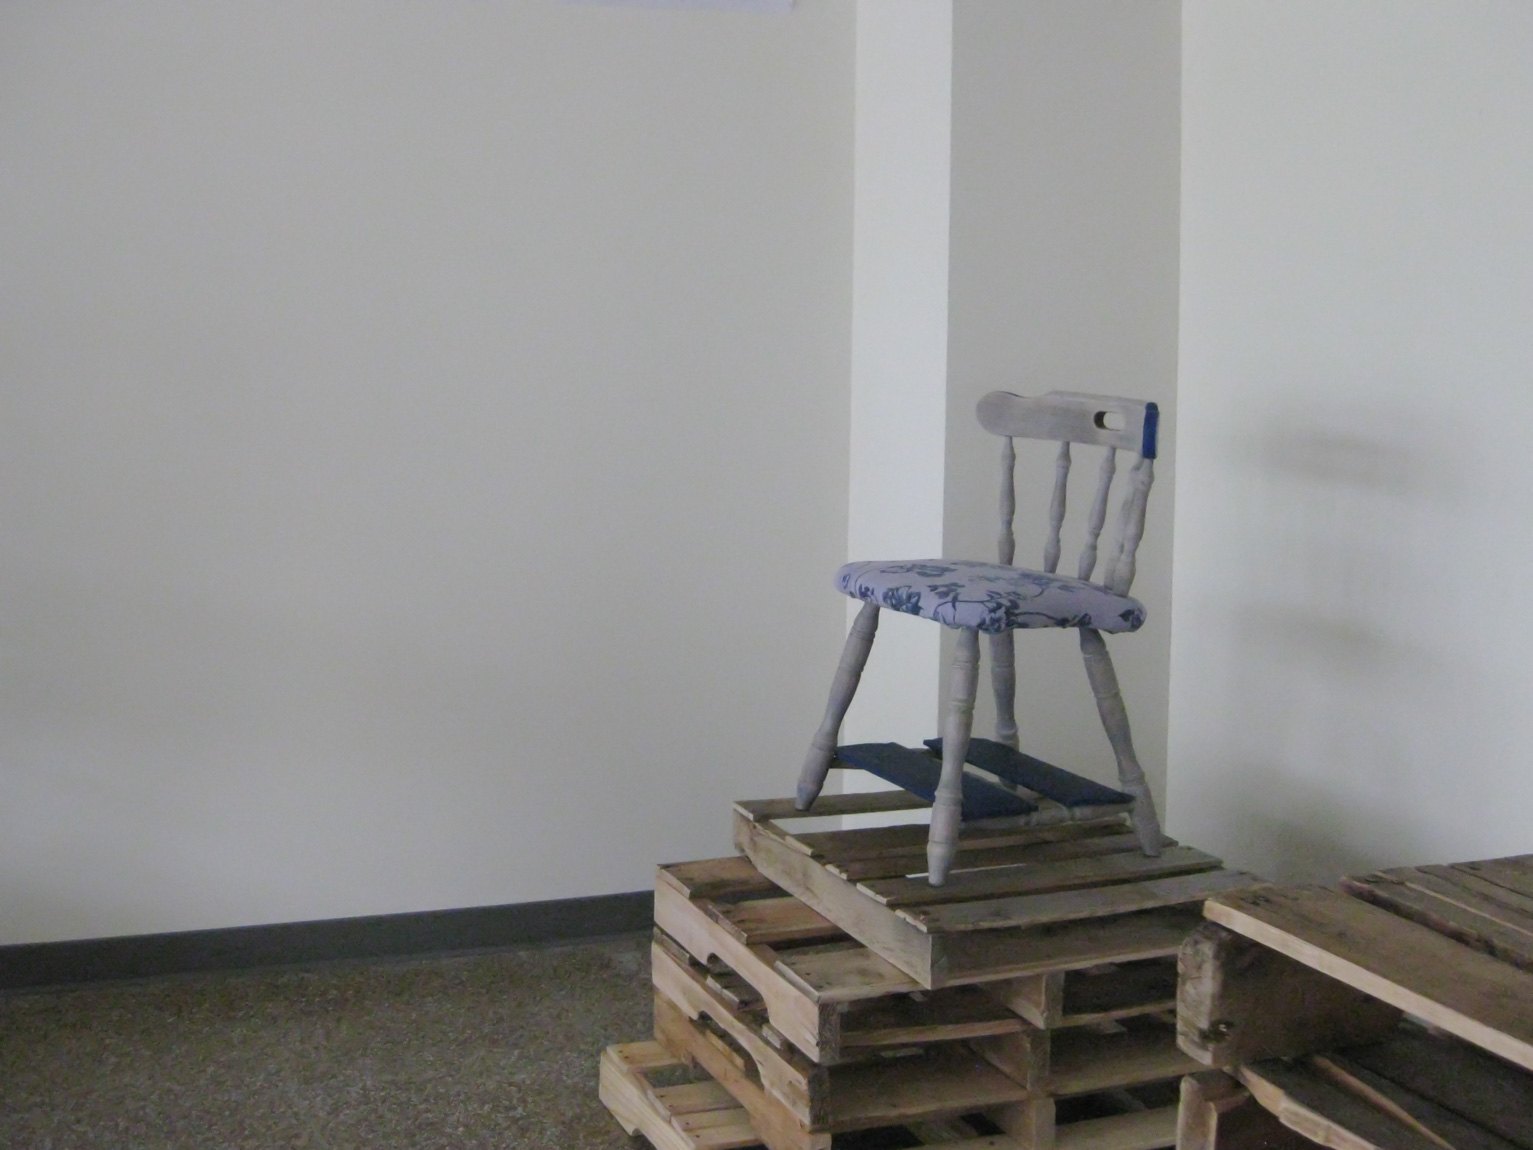 A small white chair sits on a stack of wood pallets.